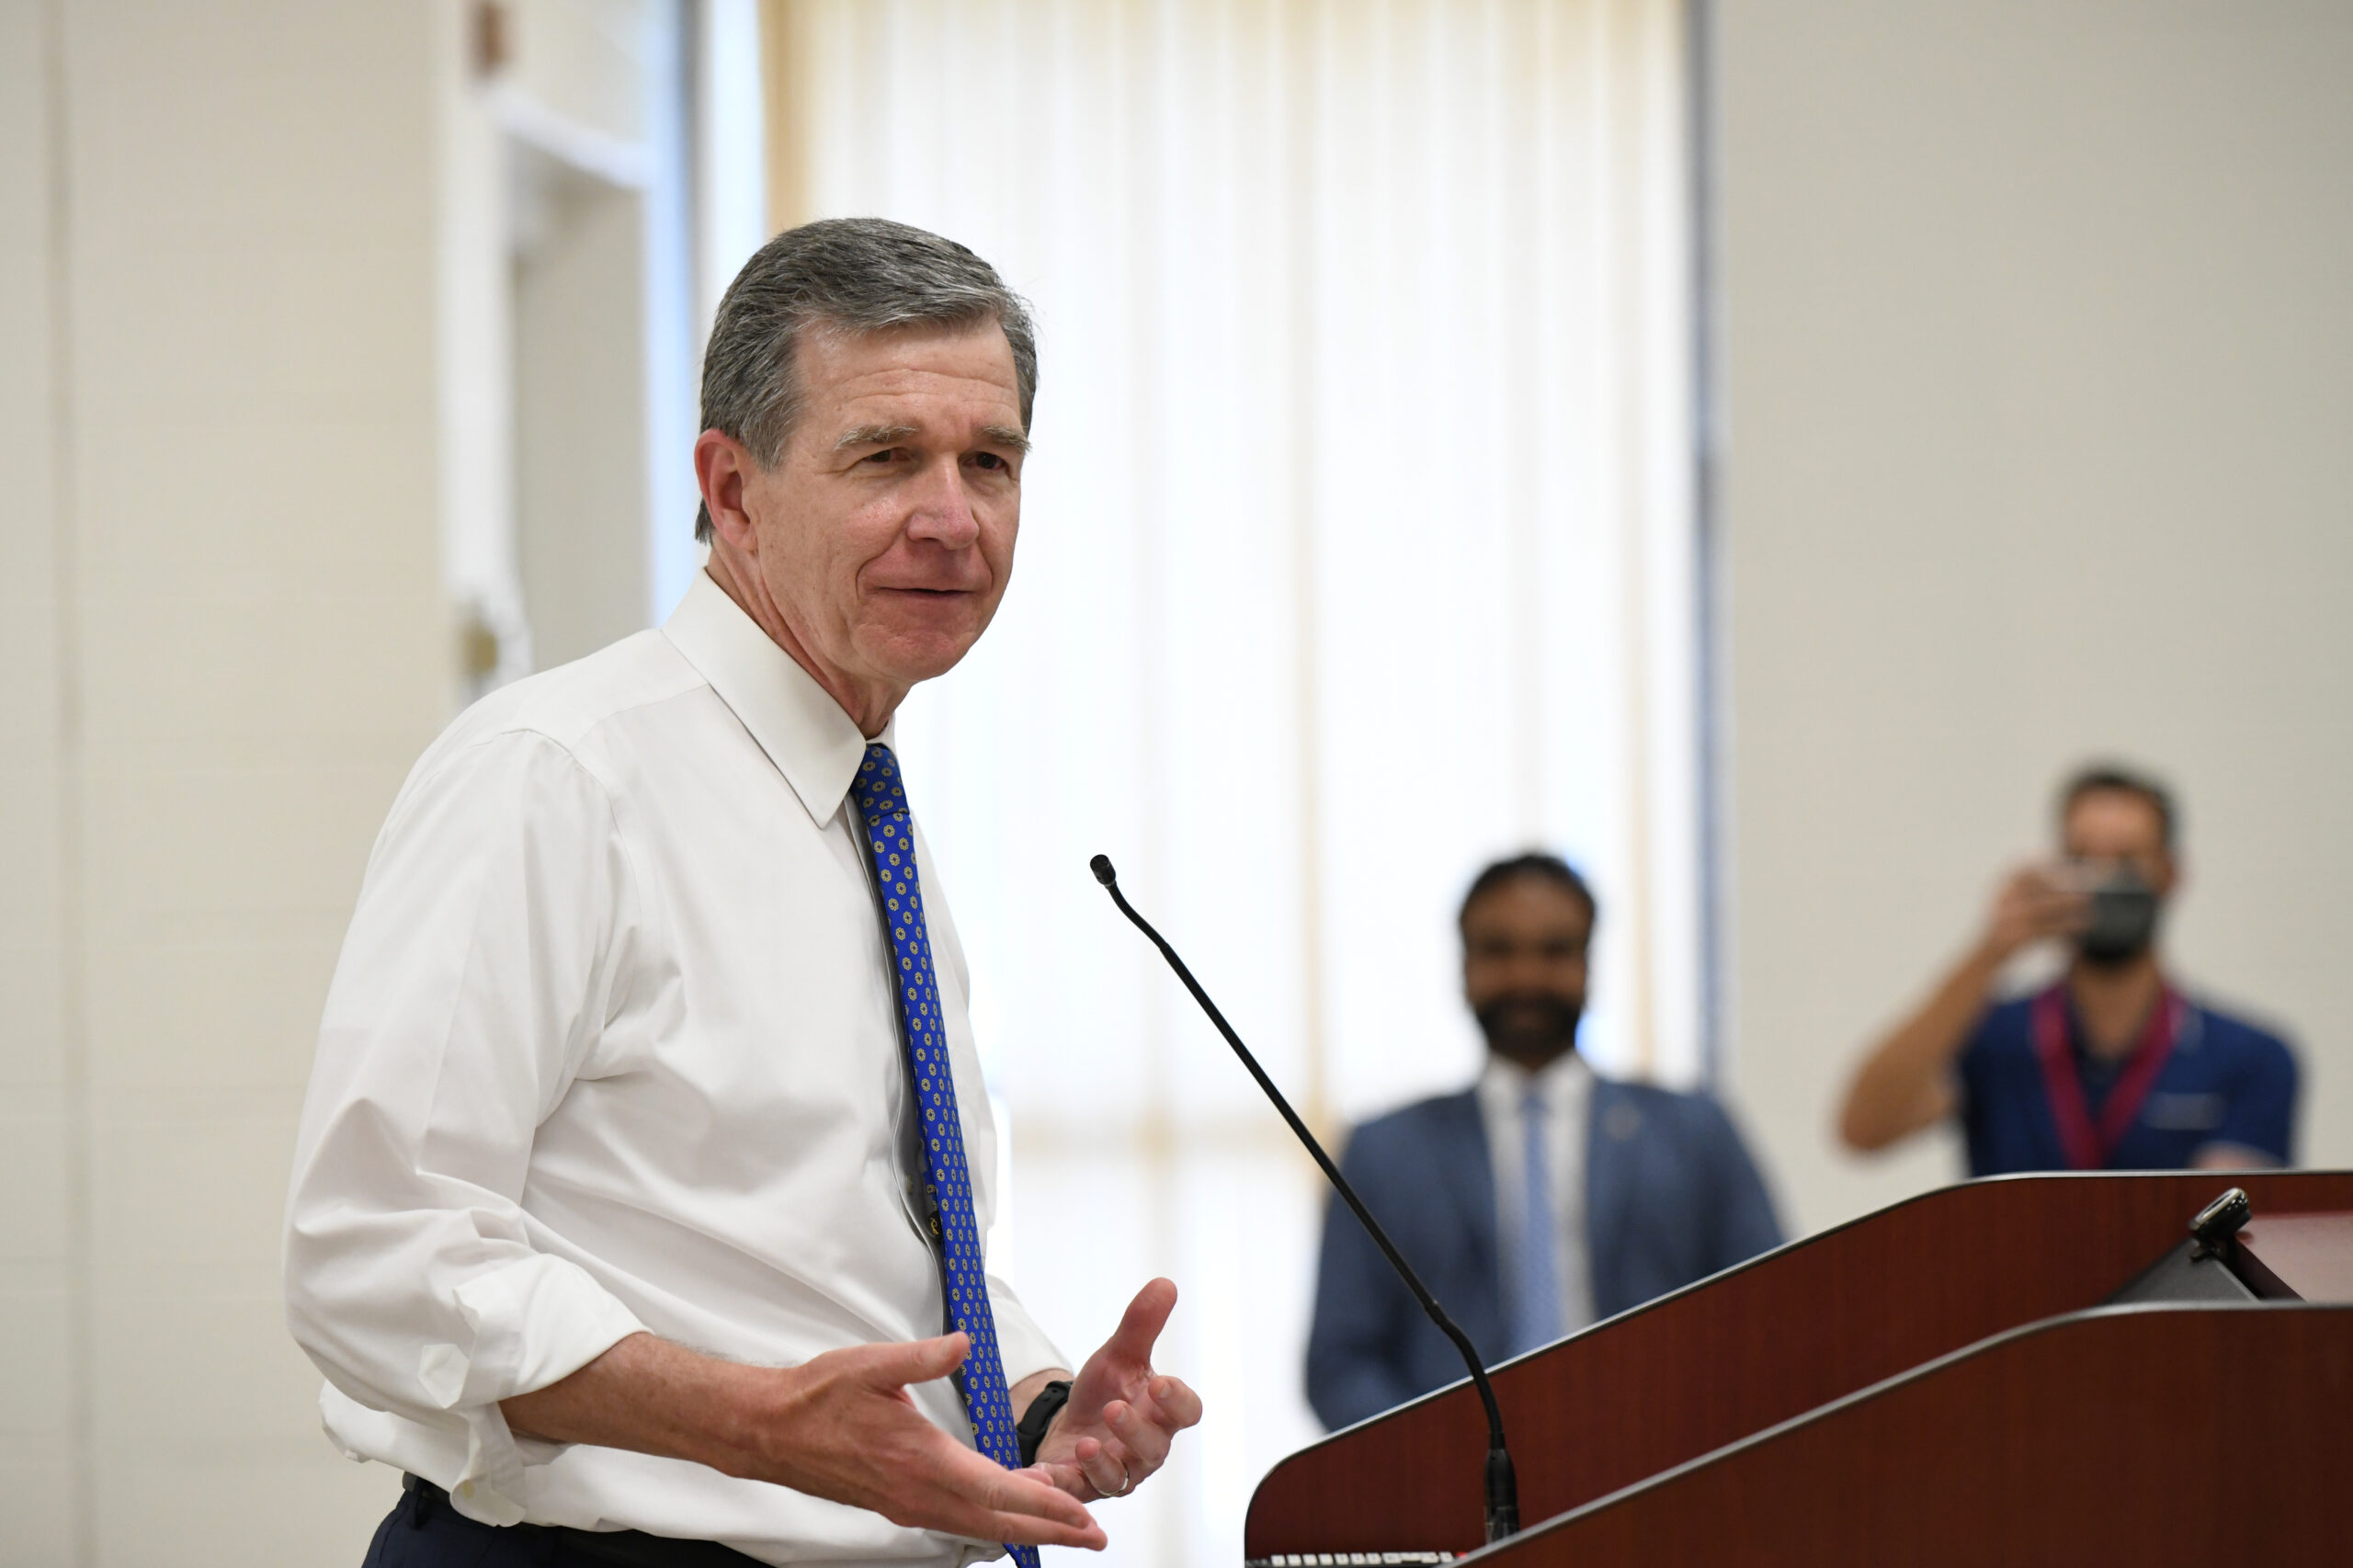 Governor Roy Cooper is shown speaking at a podium. Two people are in the background listening. One person is taking a photo.